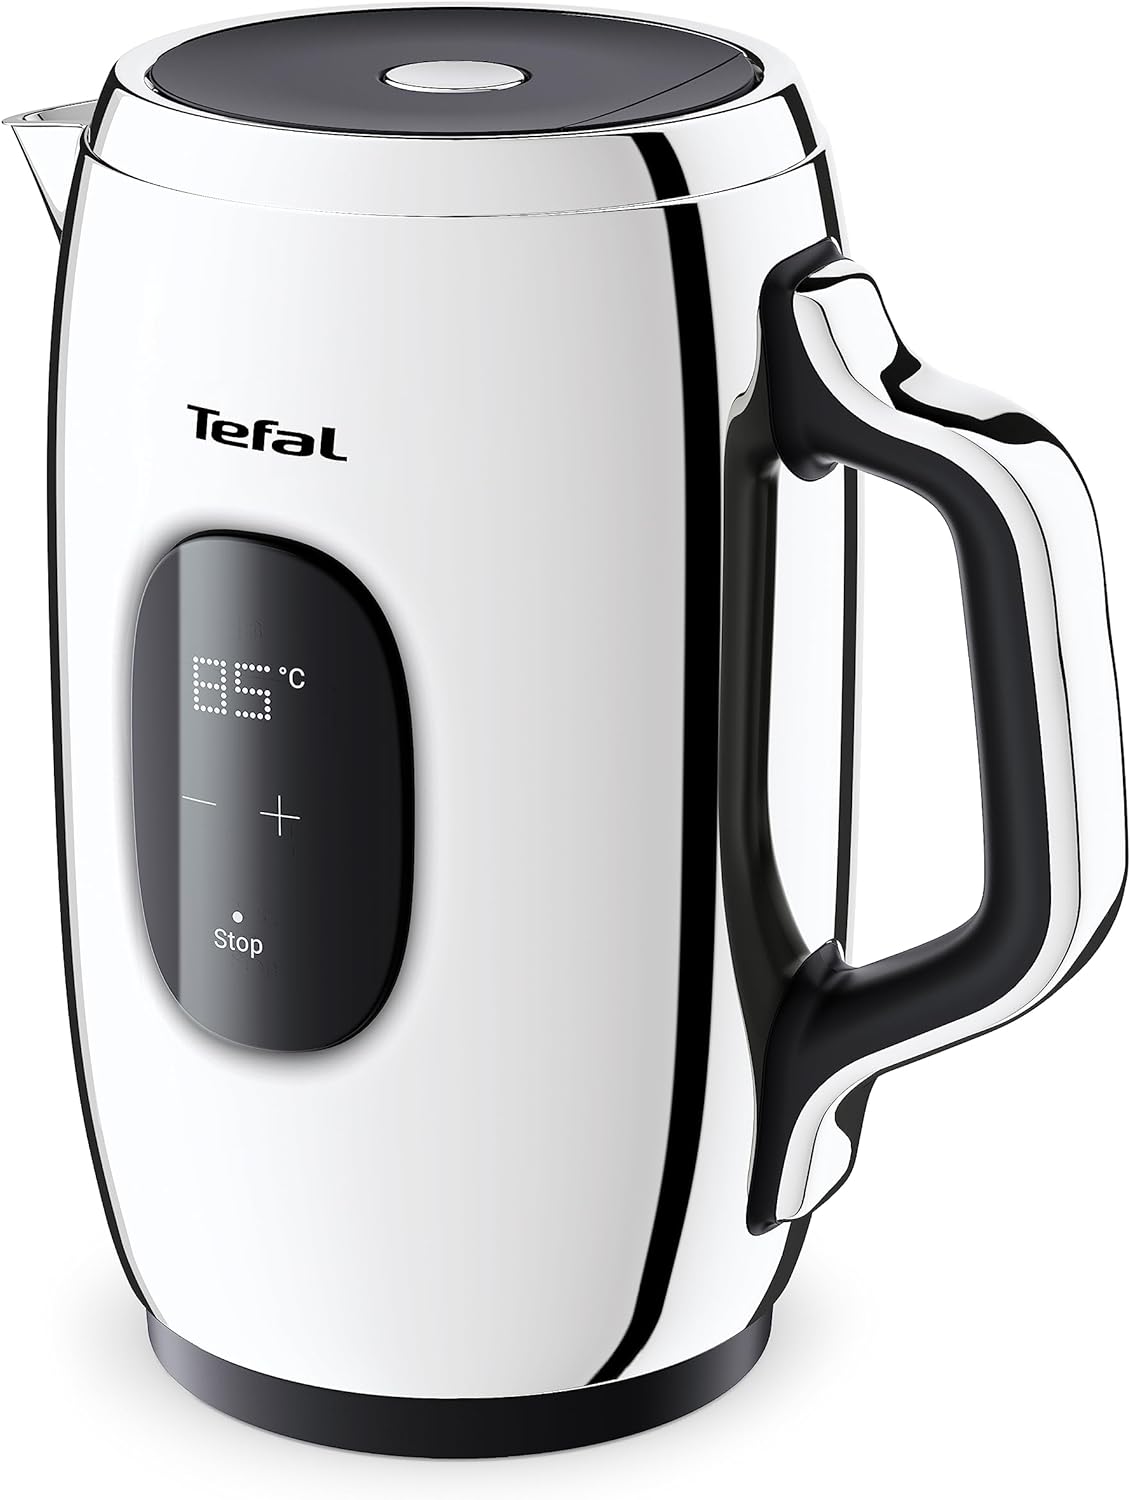 Tefal KI883D Majestuo Kettle | Intuitive Control Panel | 9 Temperatures | Double Layer Design | Keep Warm Function | Removable Anti-limescale Filter | Water Level Indicator | Stainless Steel